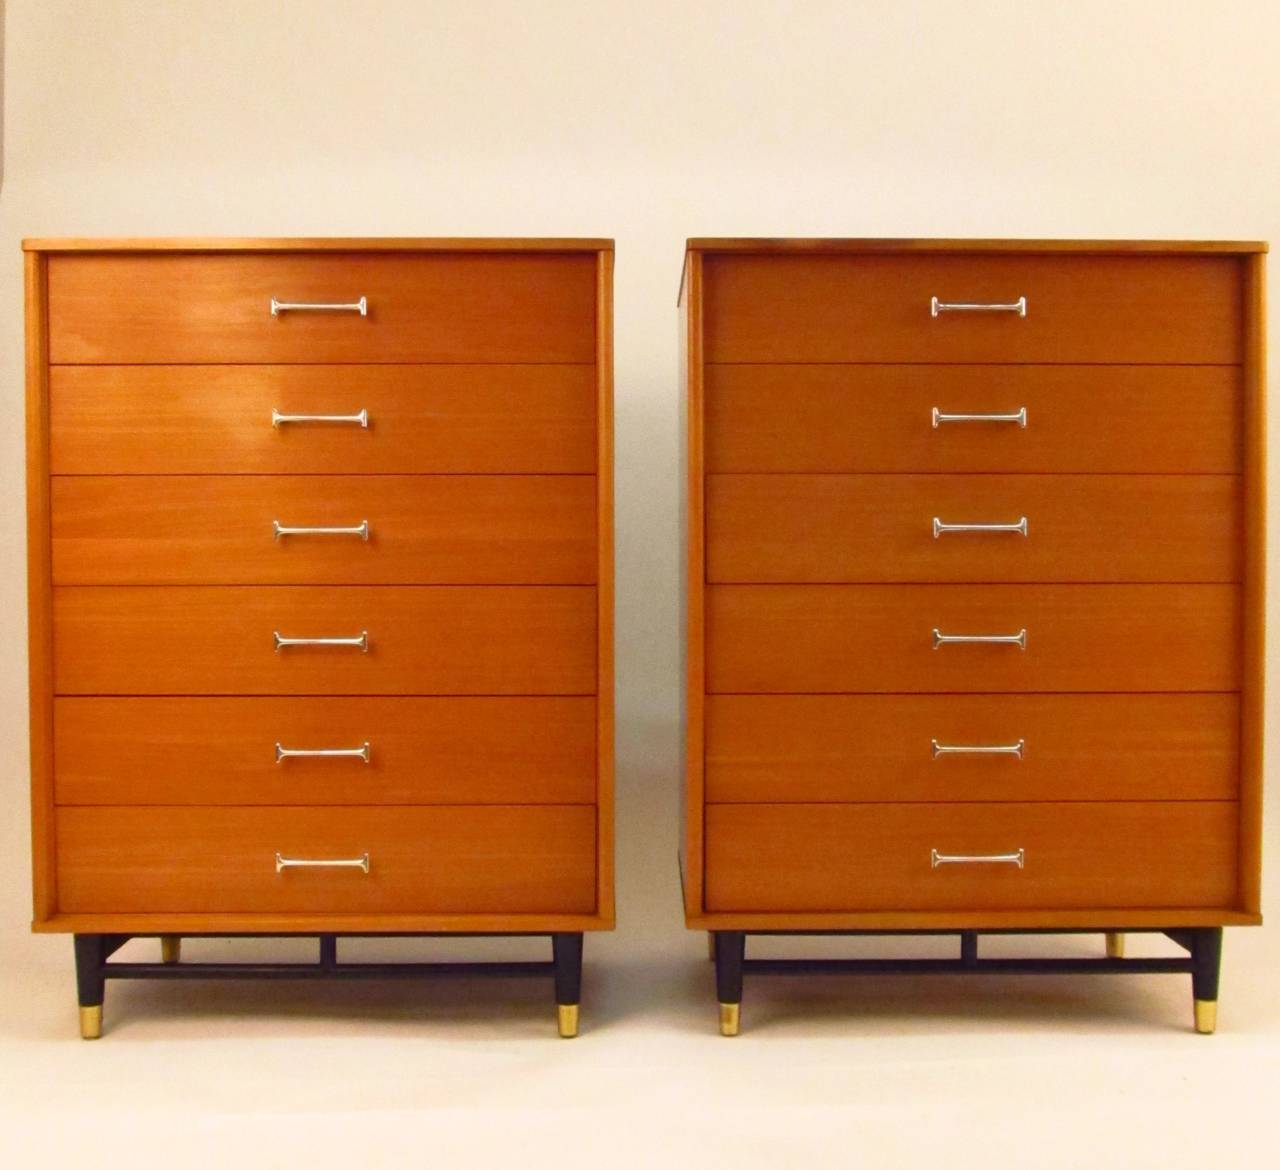 Very fine pair of dressers from the mid-1950s. Both pieces have a date code on the back of 1/54. Each drawer has dovetail construction and a cedar bottom.